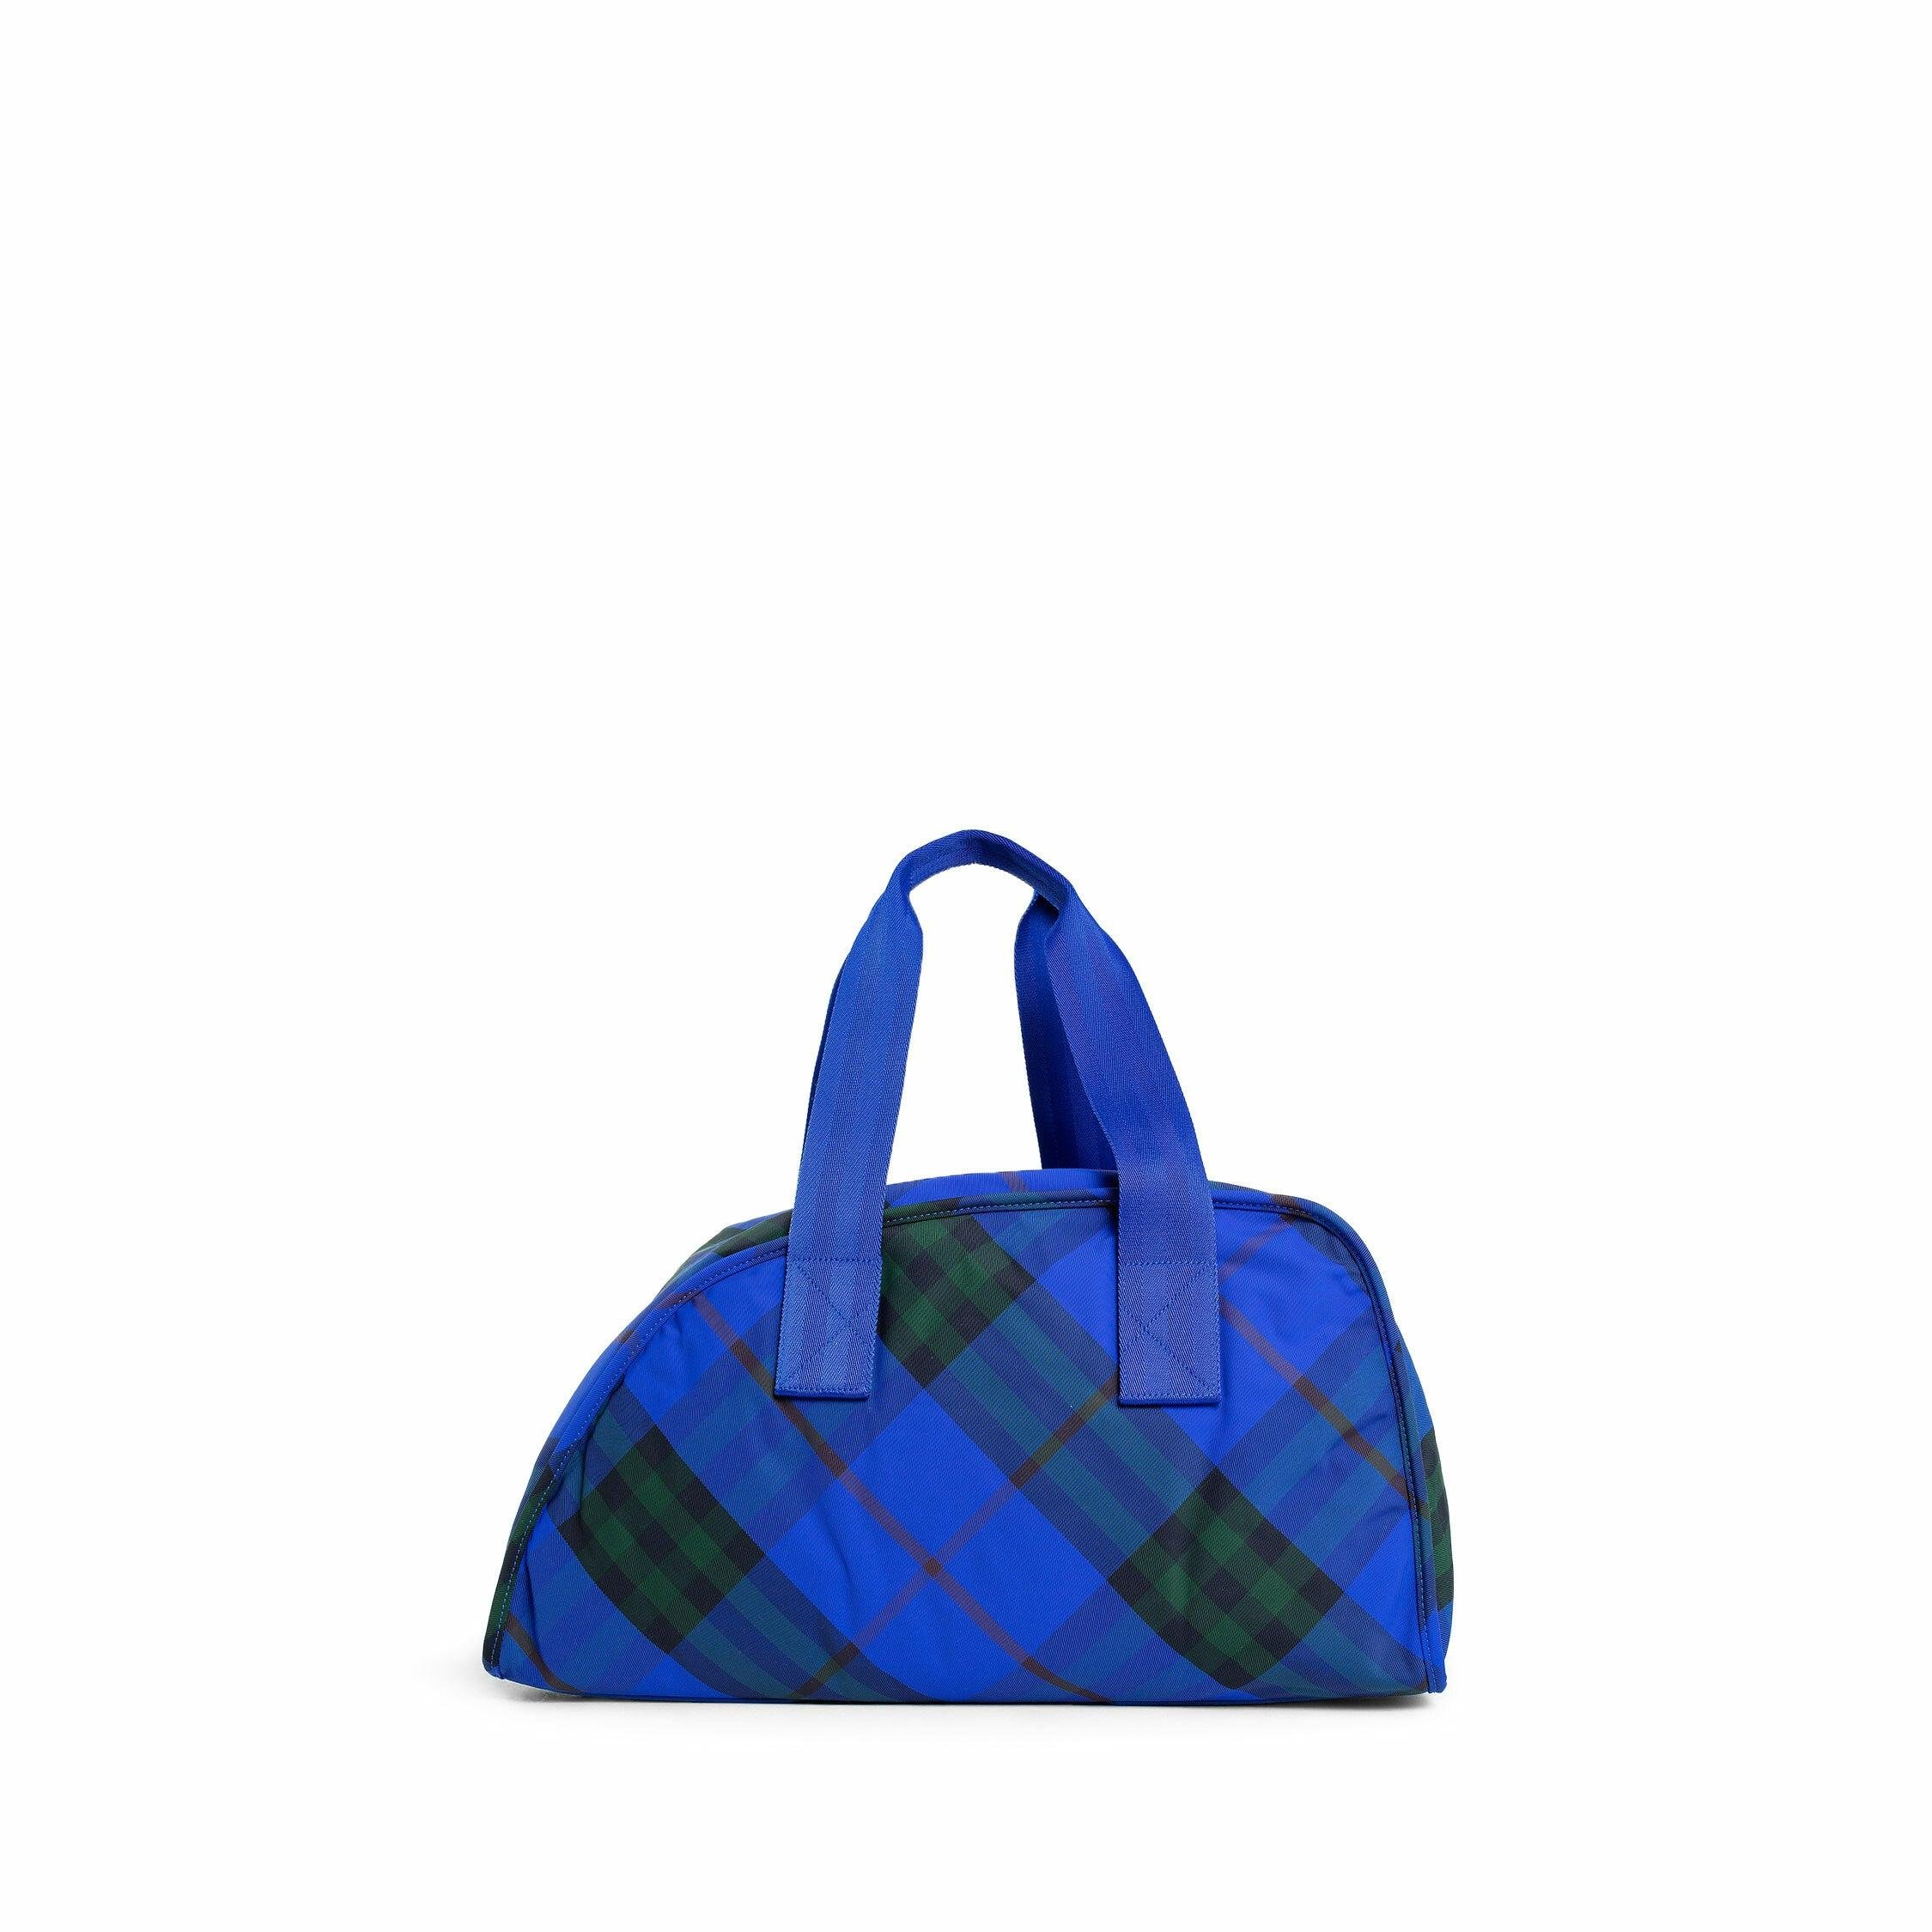 BURBERRY MAN BLUE TRAVEL BAGS by BURBERRY